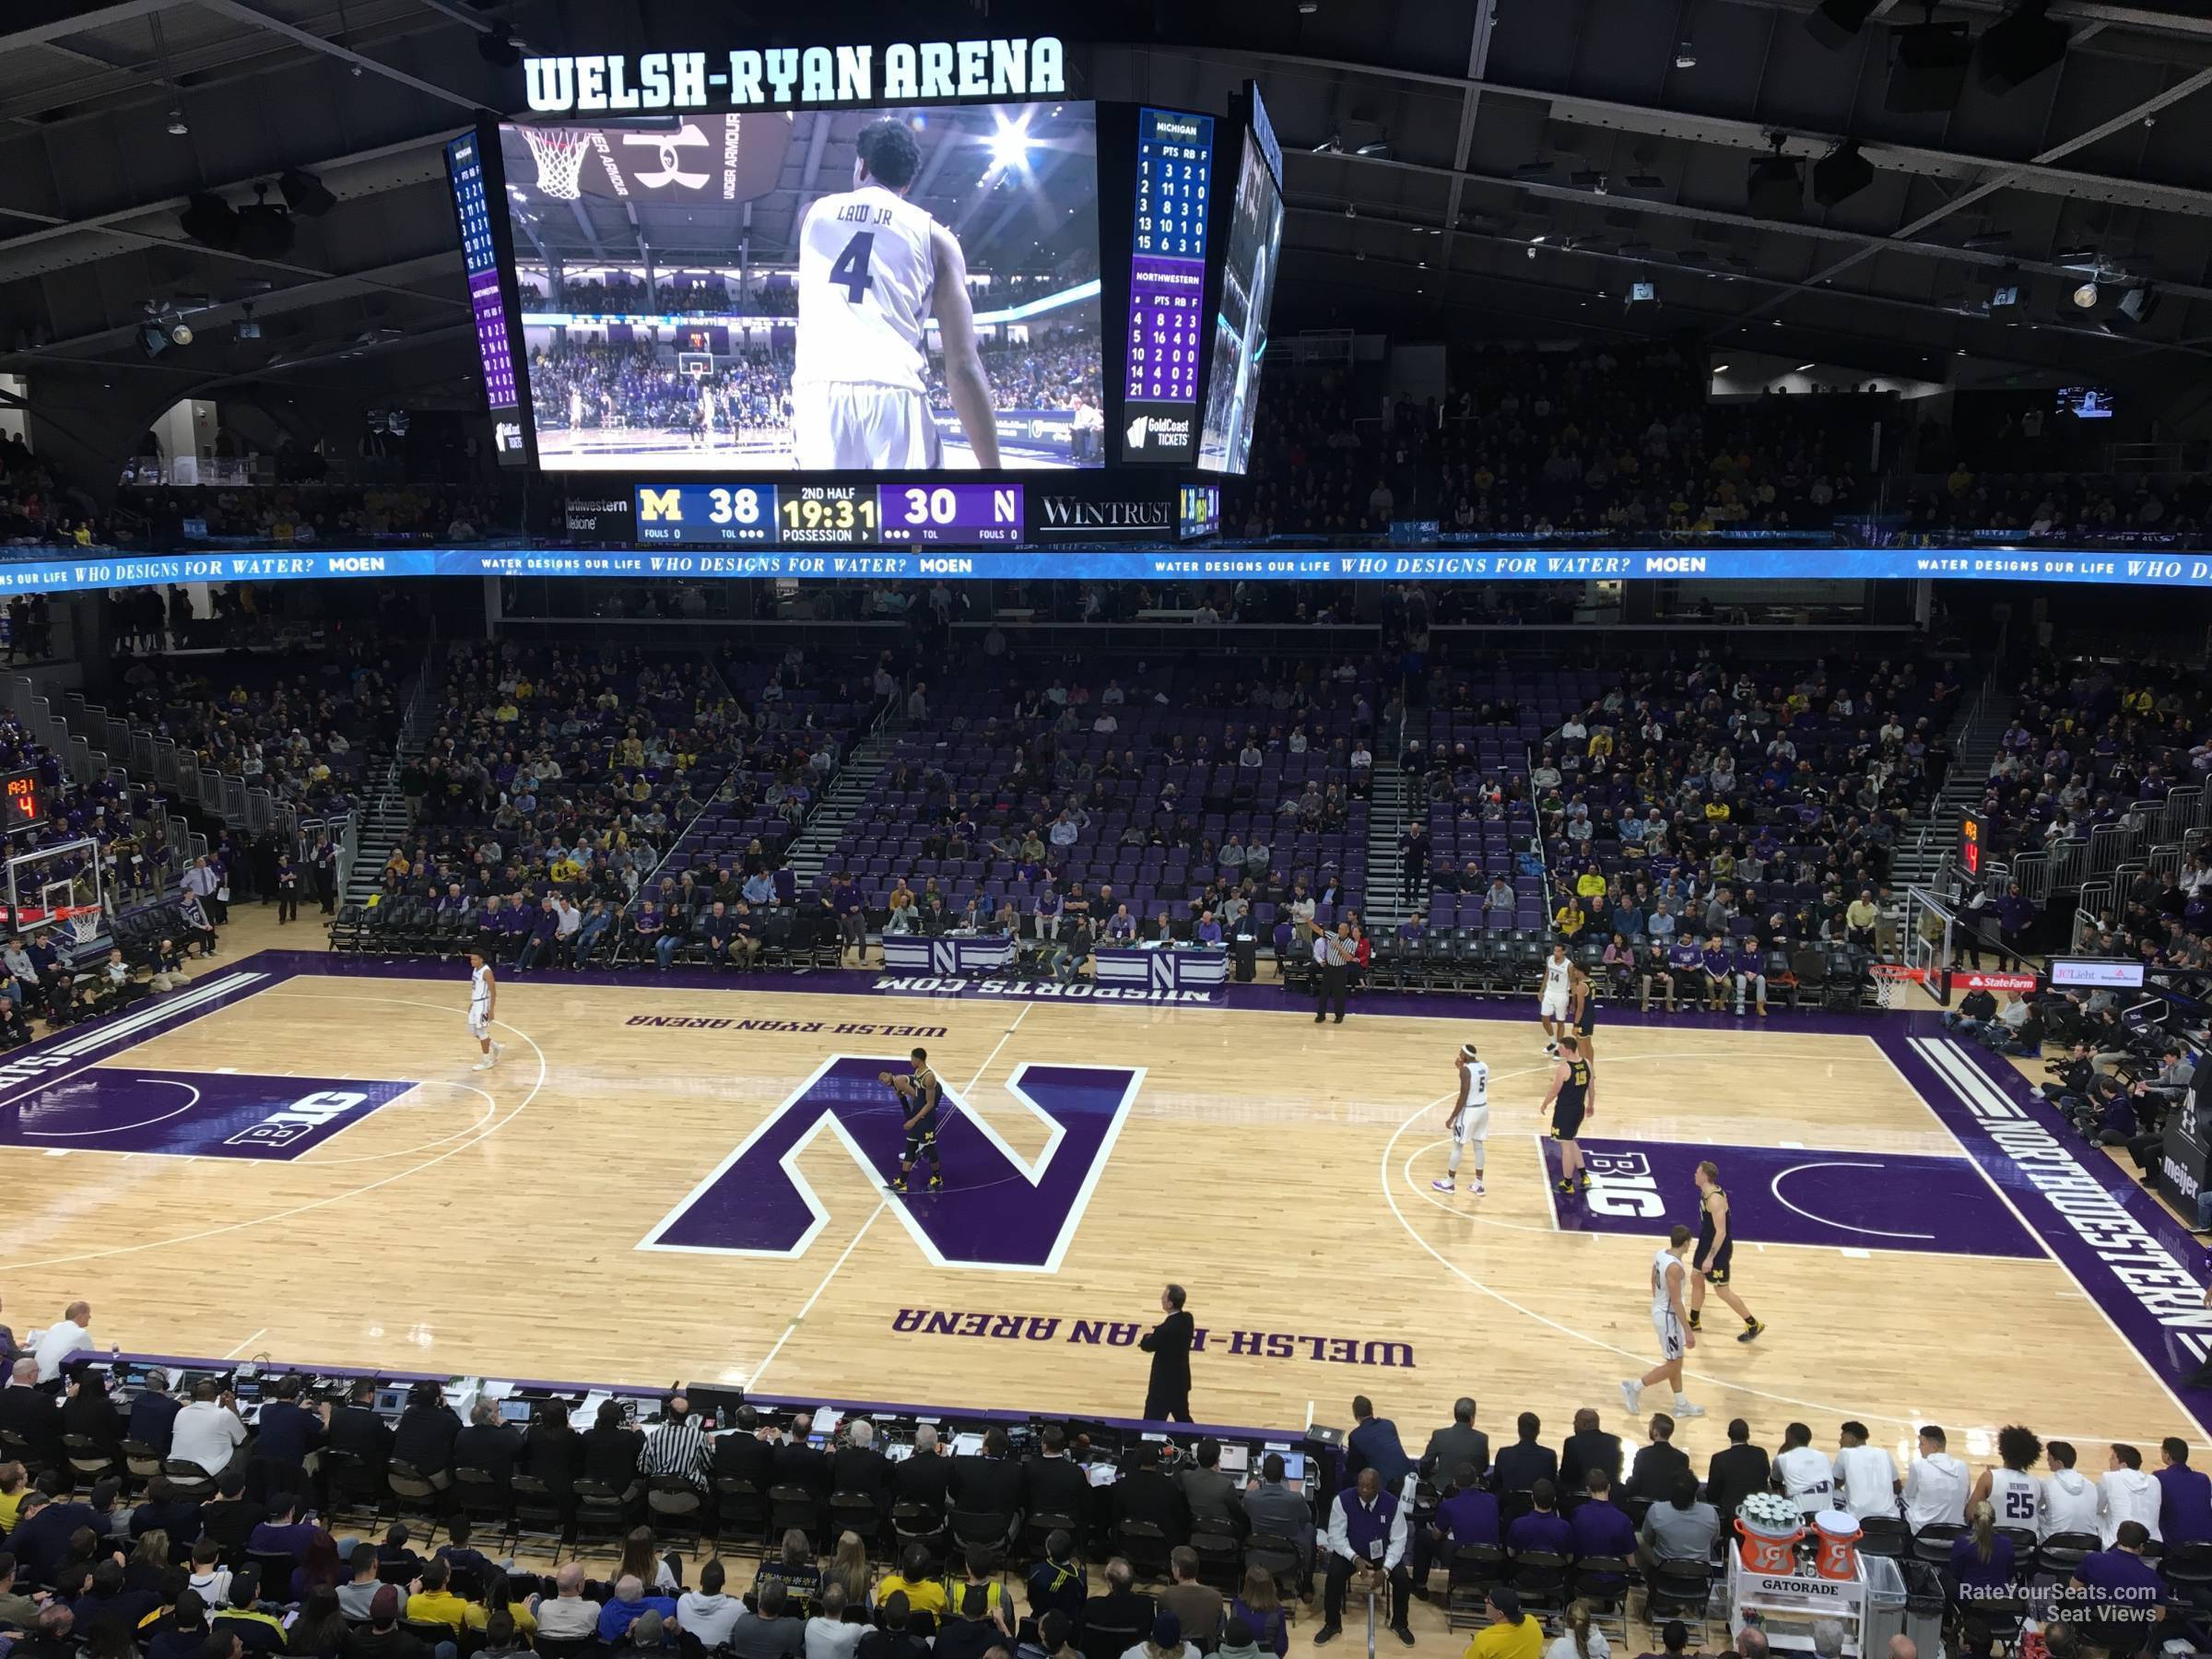 section 208, row 1 seat view  - welsh-ryan arena